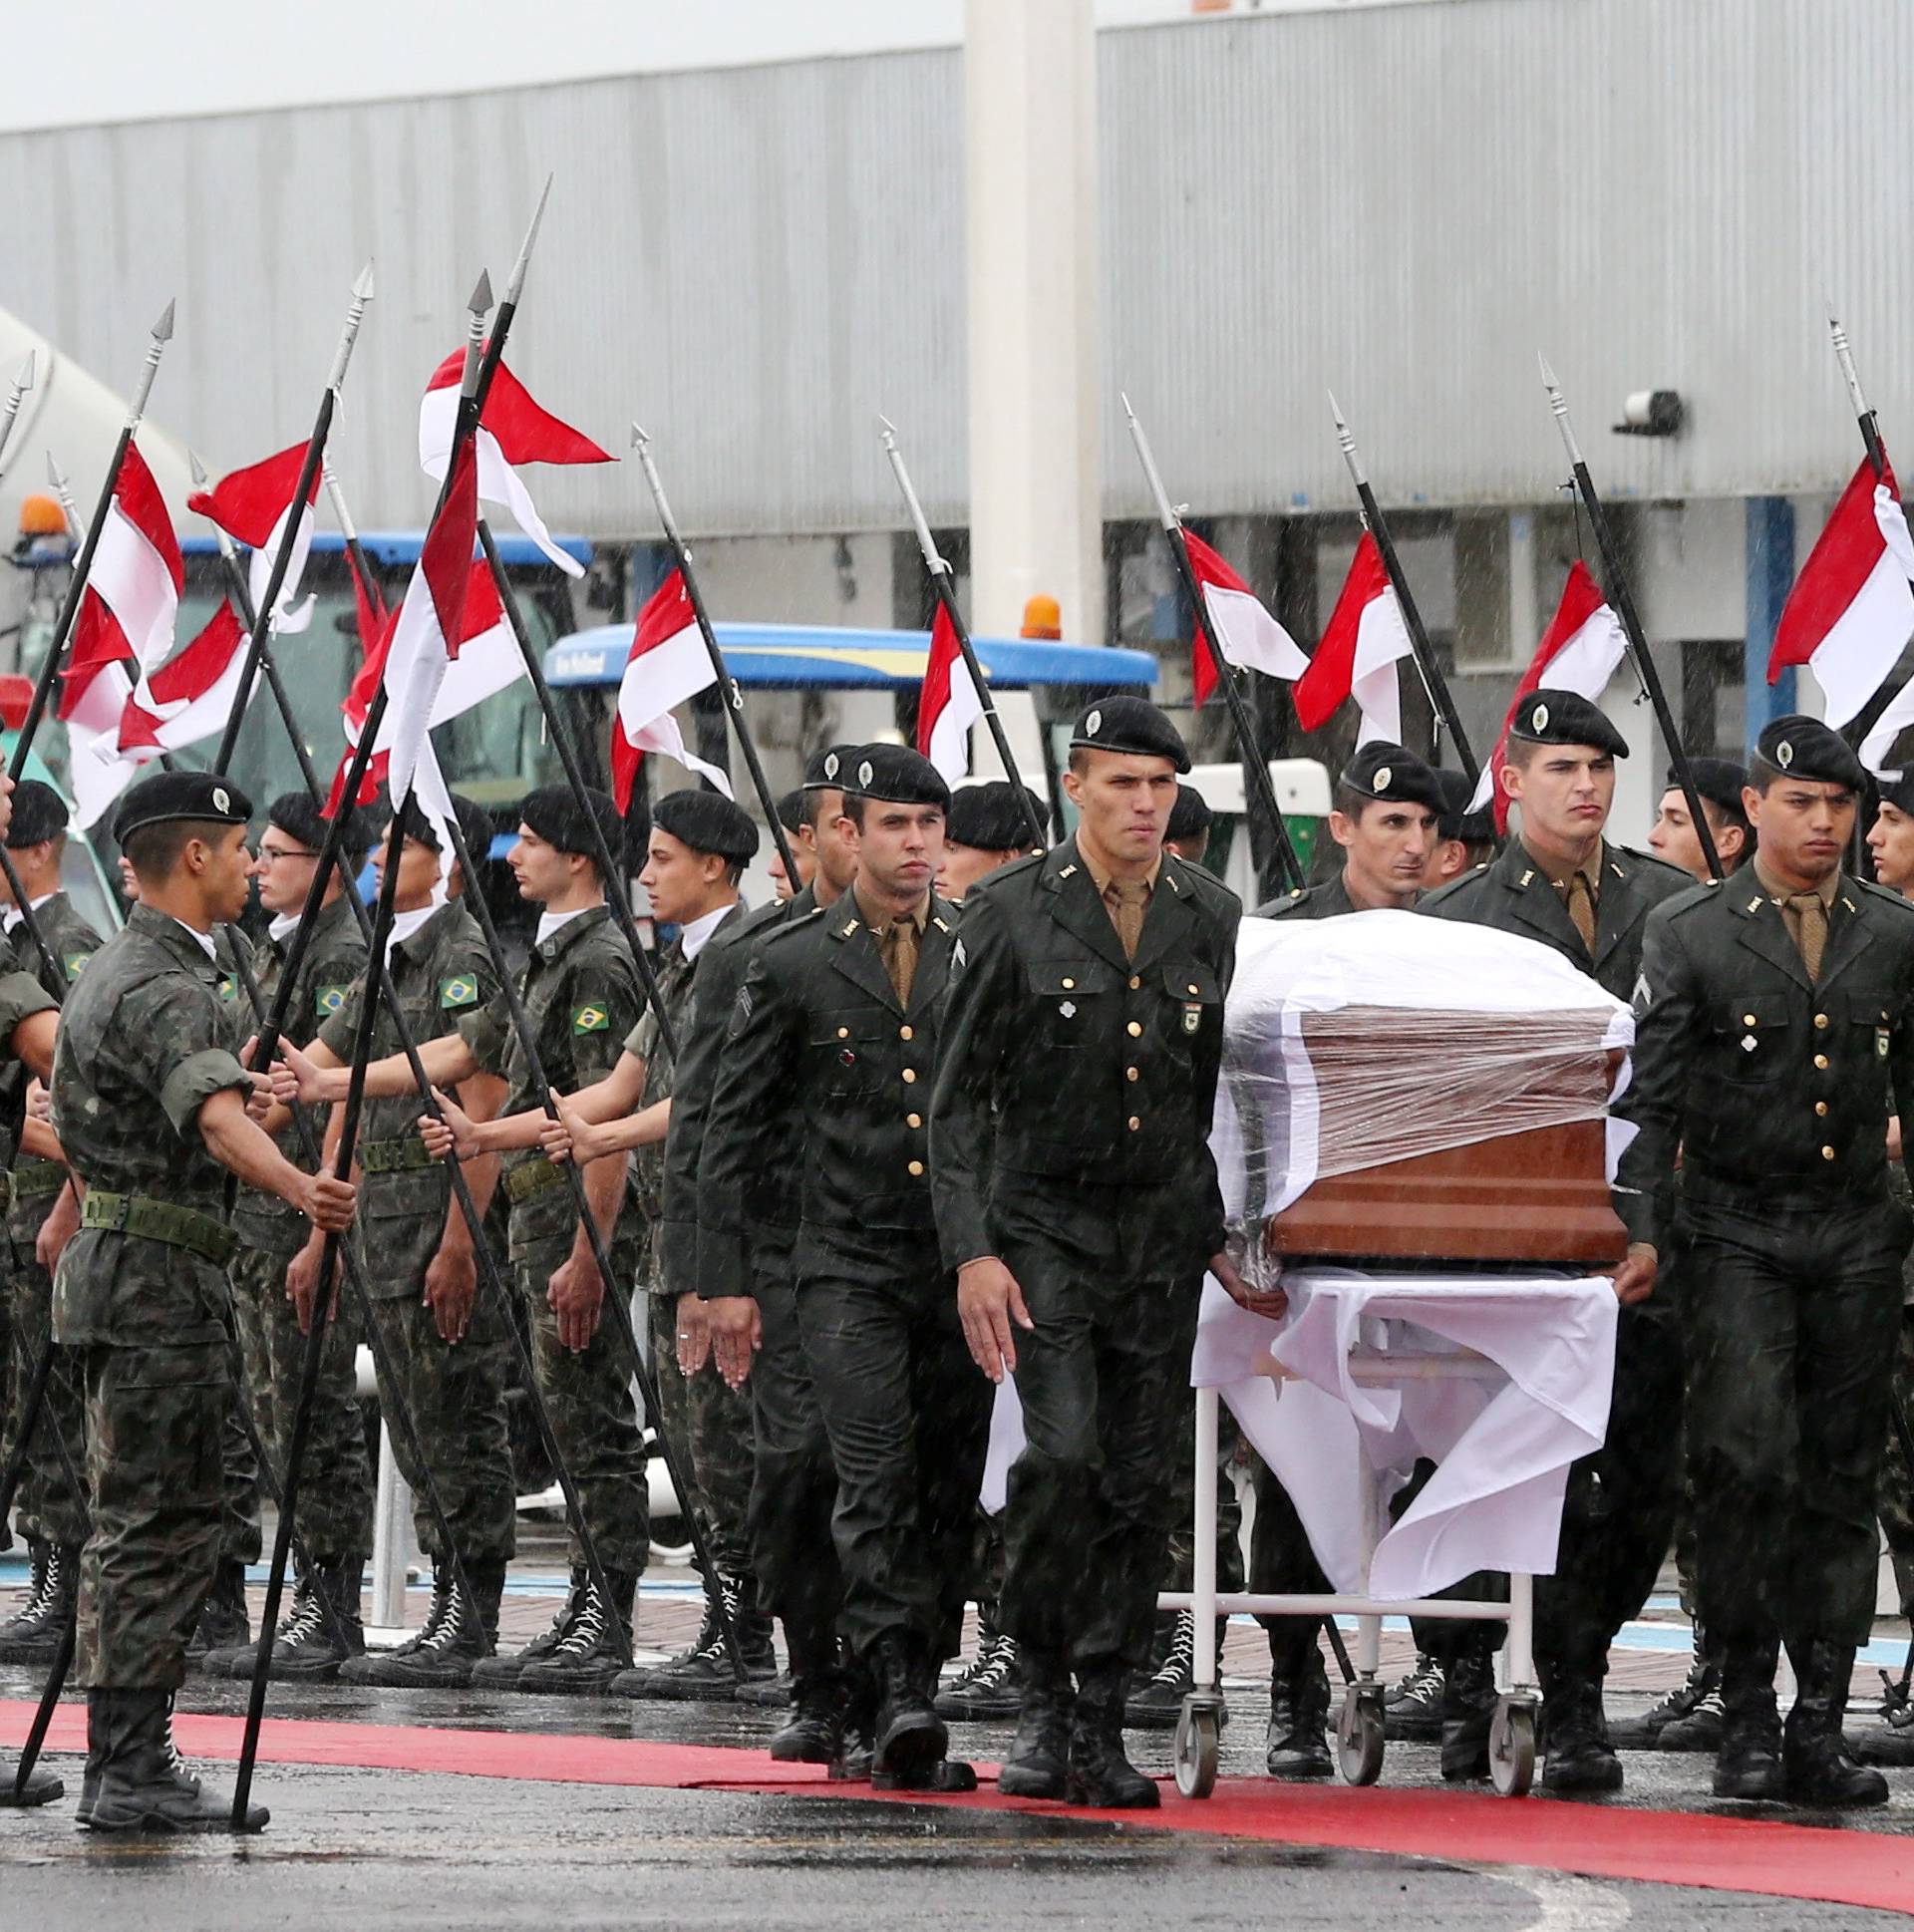 Military personnel carry a coffin containing the mortal remains of a victim of the plane crash in Colombia during arrival in Chapeco